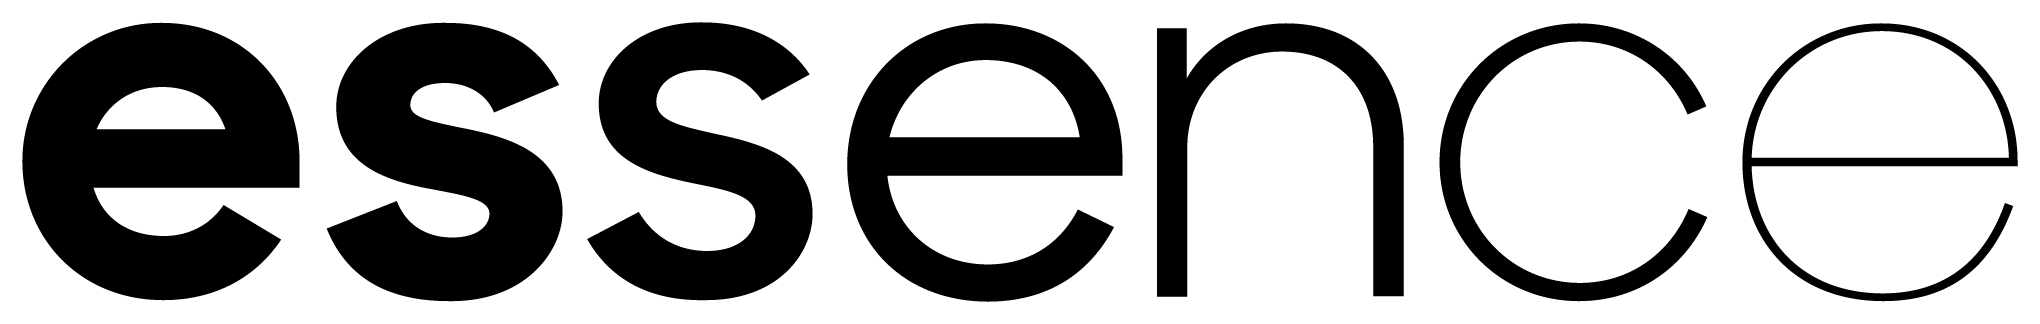 New Logo and Identity for Essence by Ueno